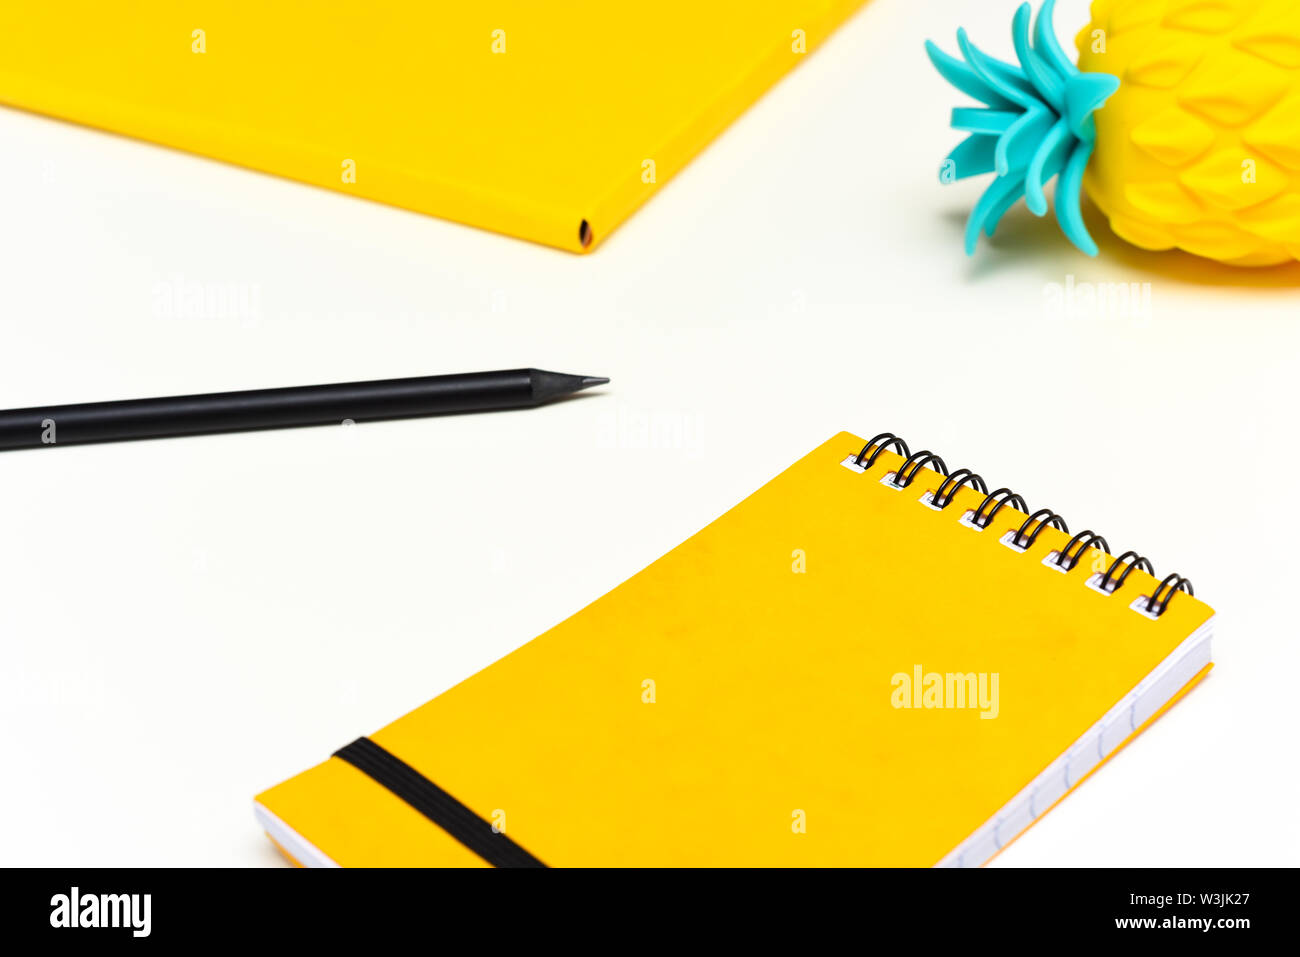 https://c8.alamy.com/comp/W3JK27/top-view-image-of-office-supplies-or-school-accessories-trendy-yellow-colour-objects-shot-from-overhead-W3JK27.jpg